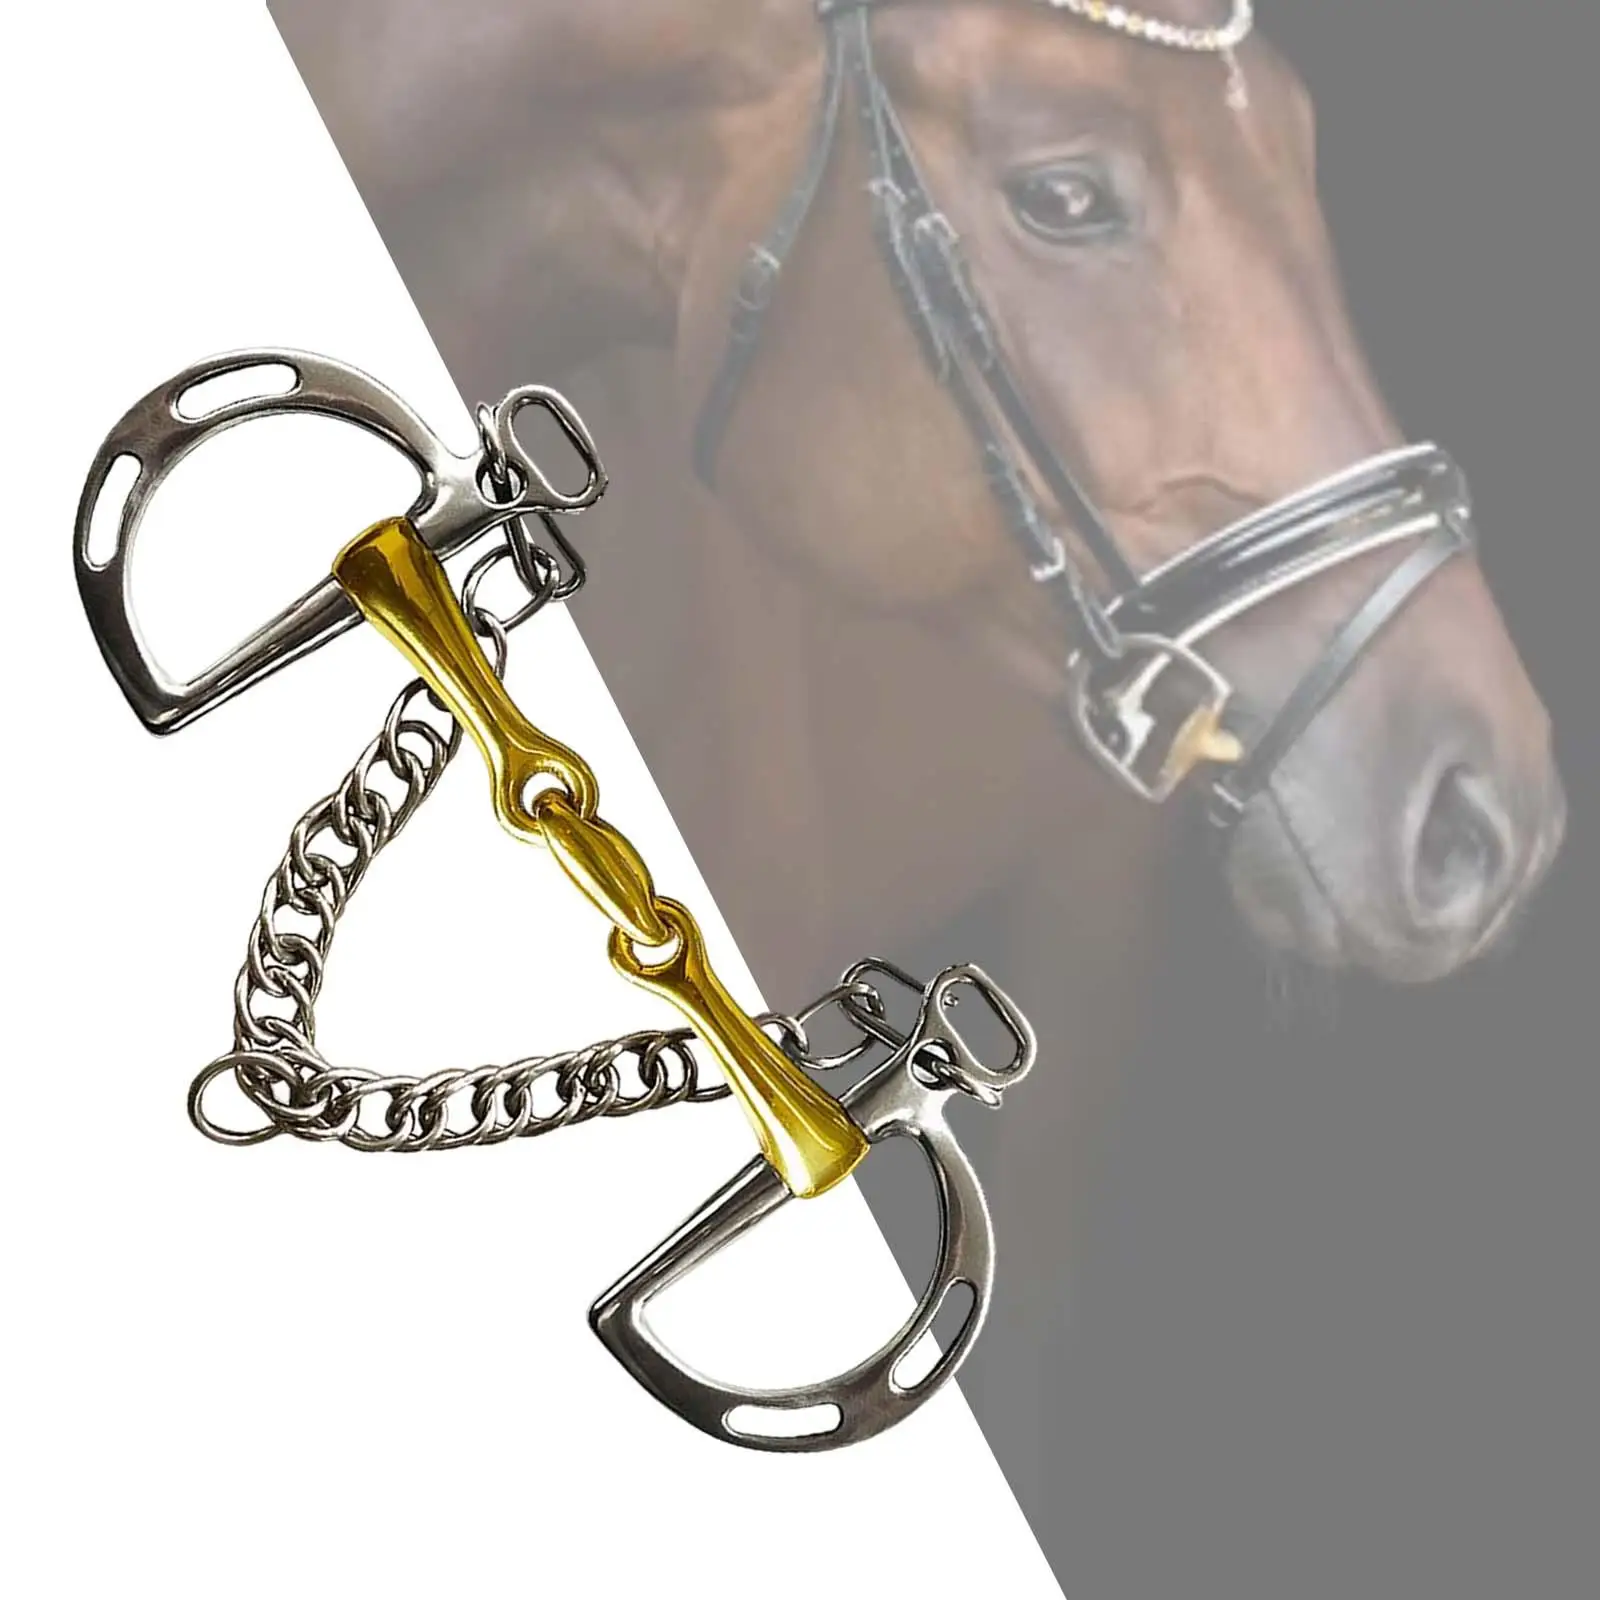 horse Bit Copper Mouth Center Roller with Silver Trims Cheek Harness for Horse